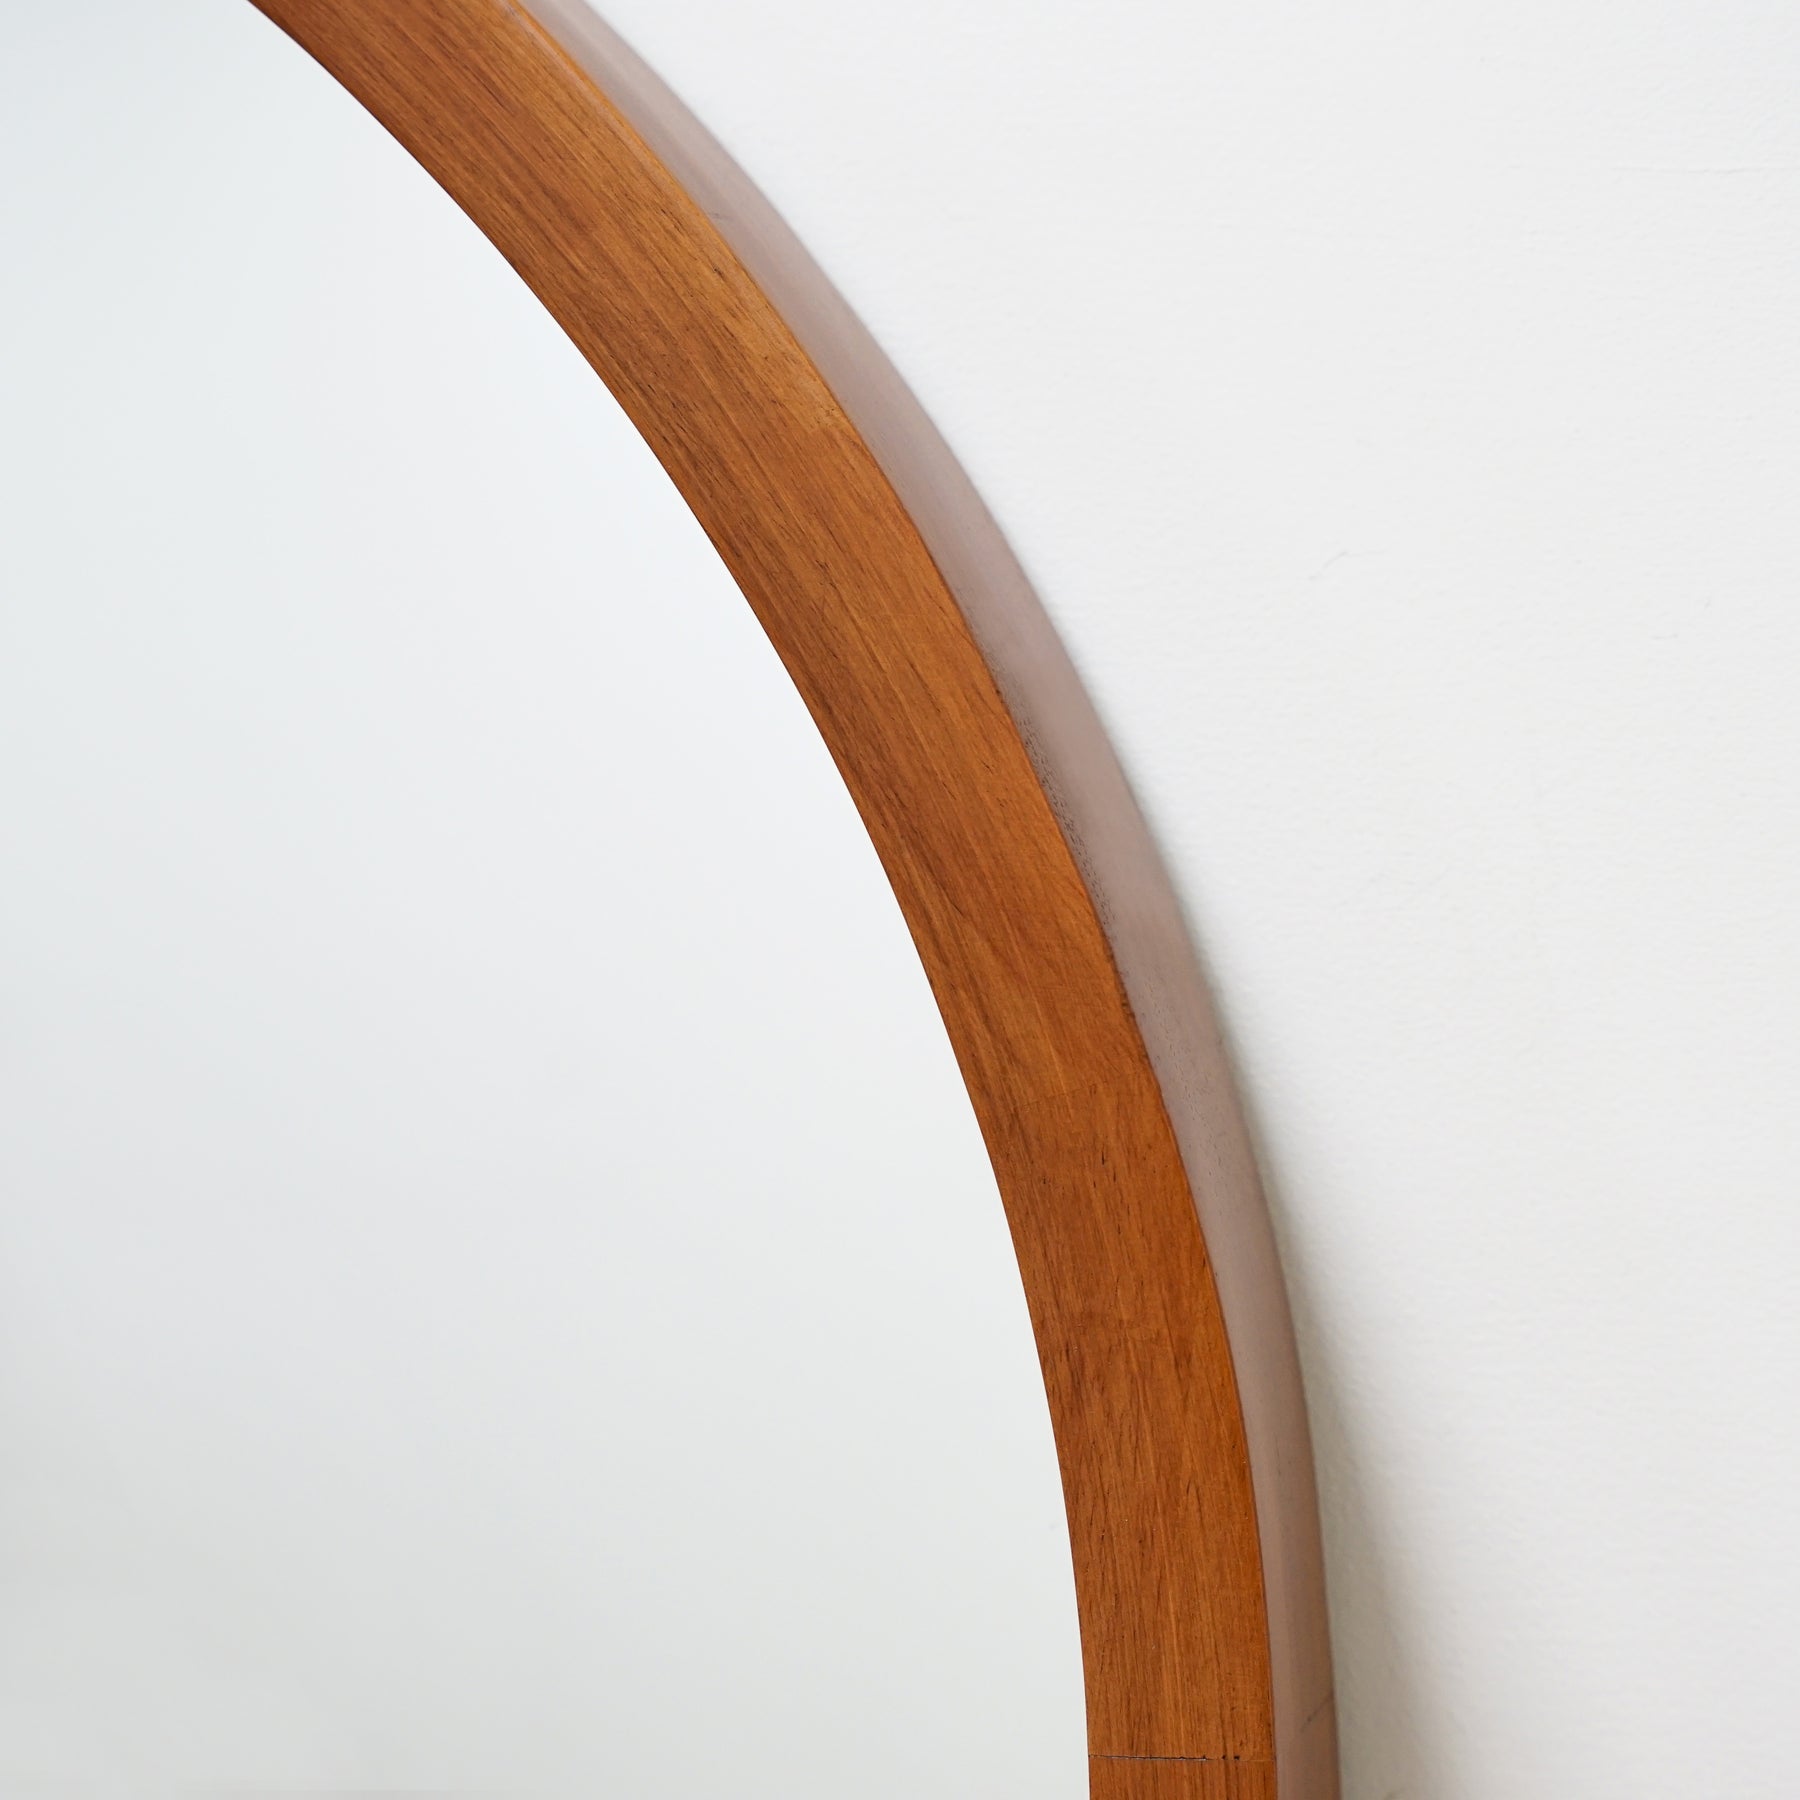 Walnut Organic Full Length Wooden Arched Mirror alternate shot of frame curve